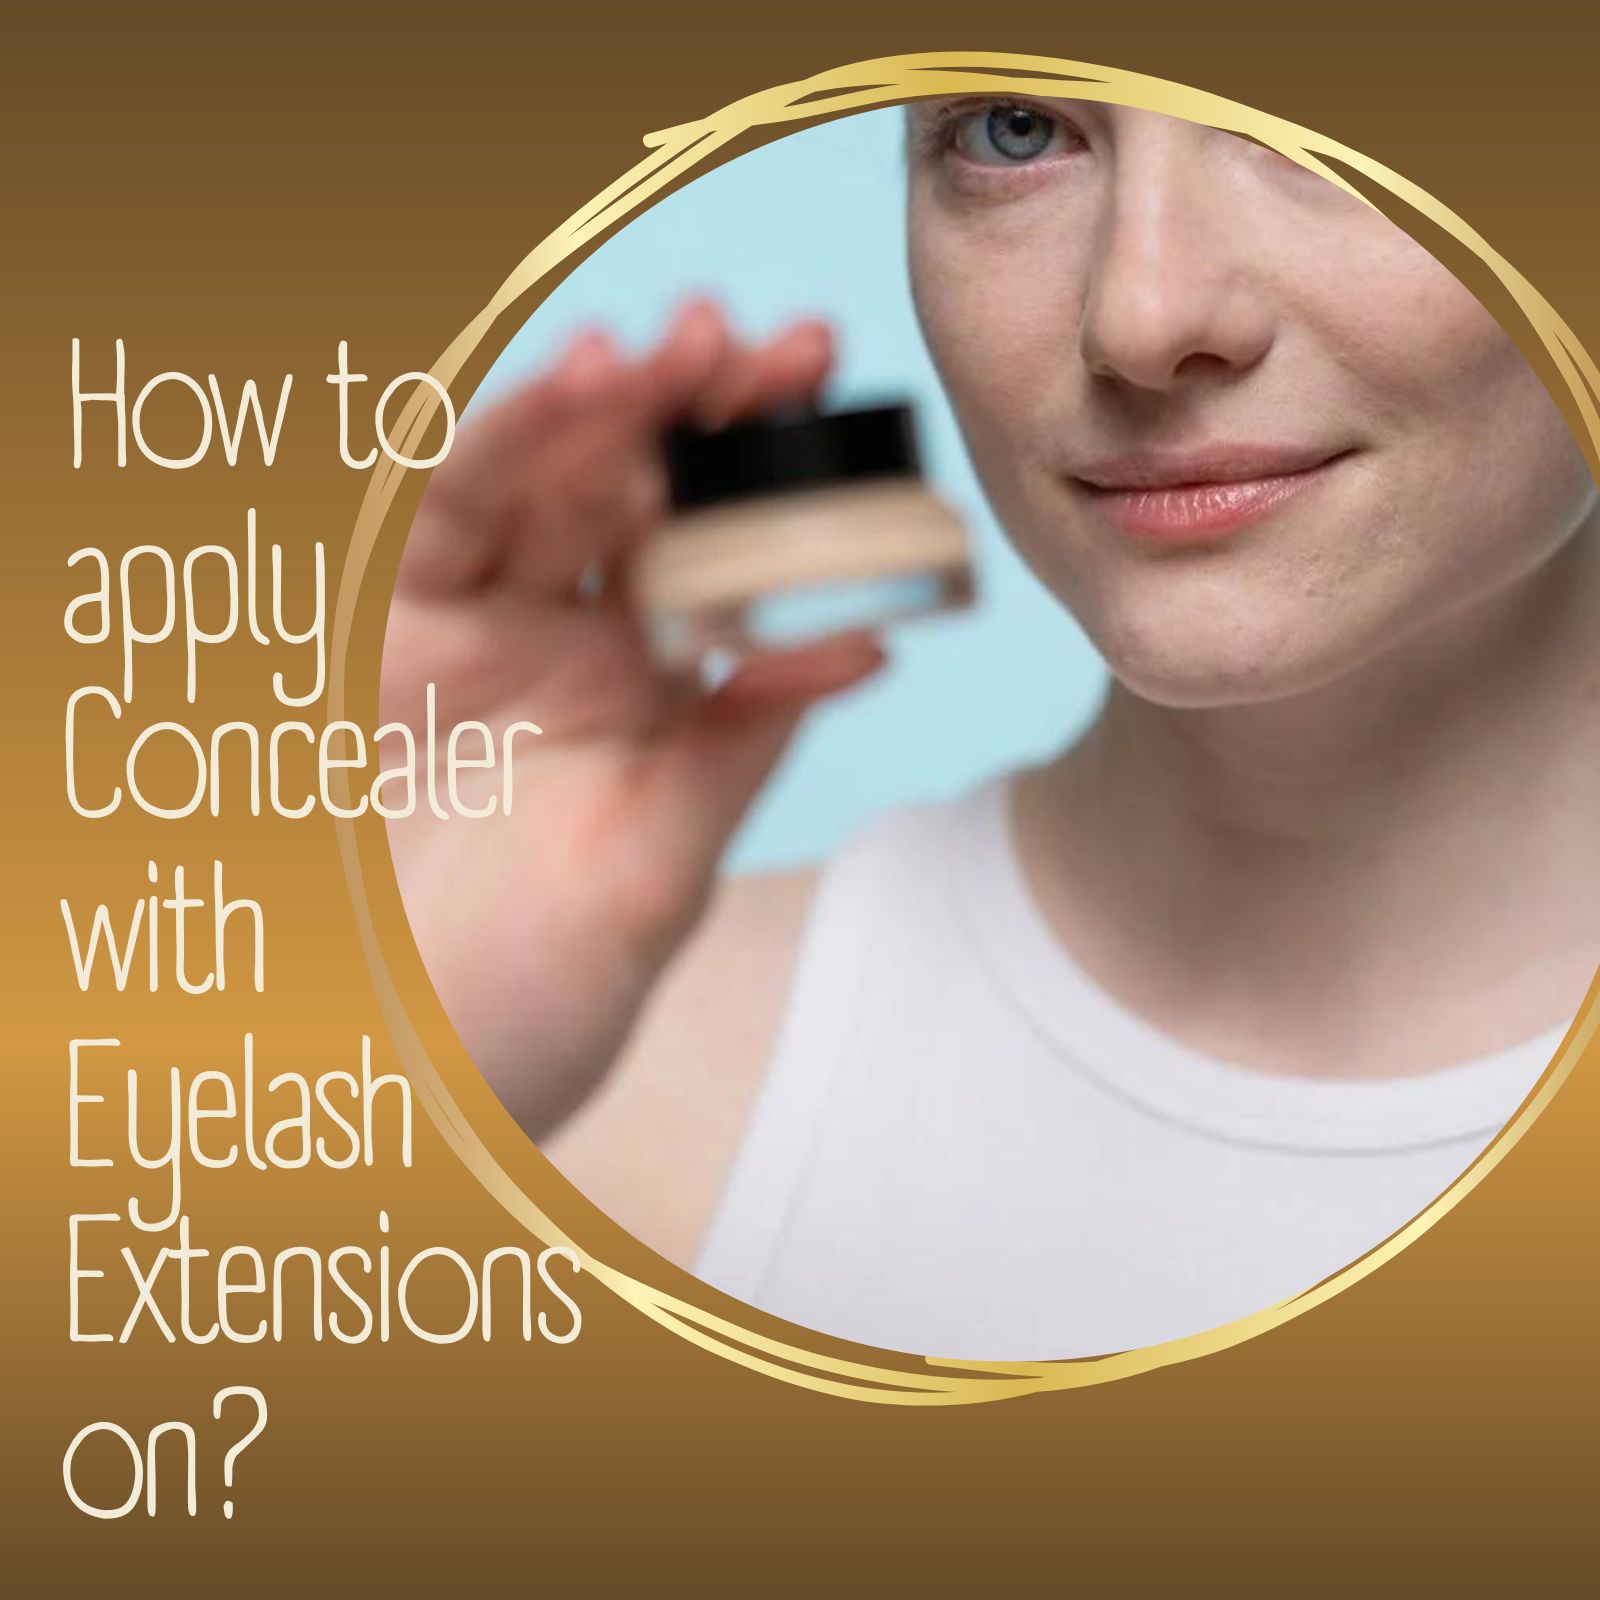 How to apply Concealer with Eyelash Extensions on